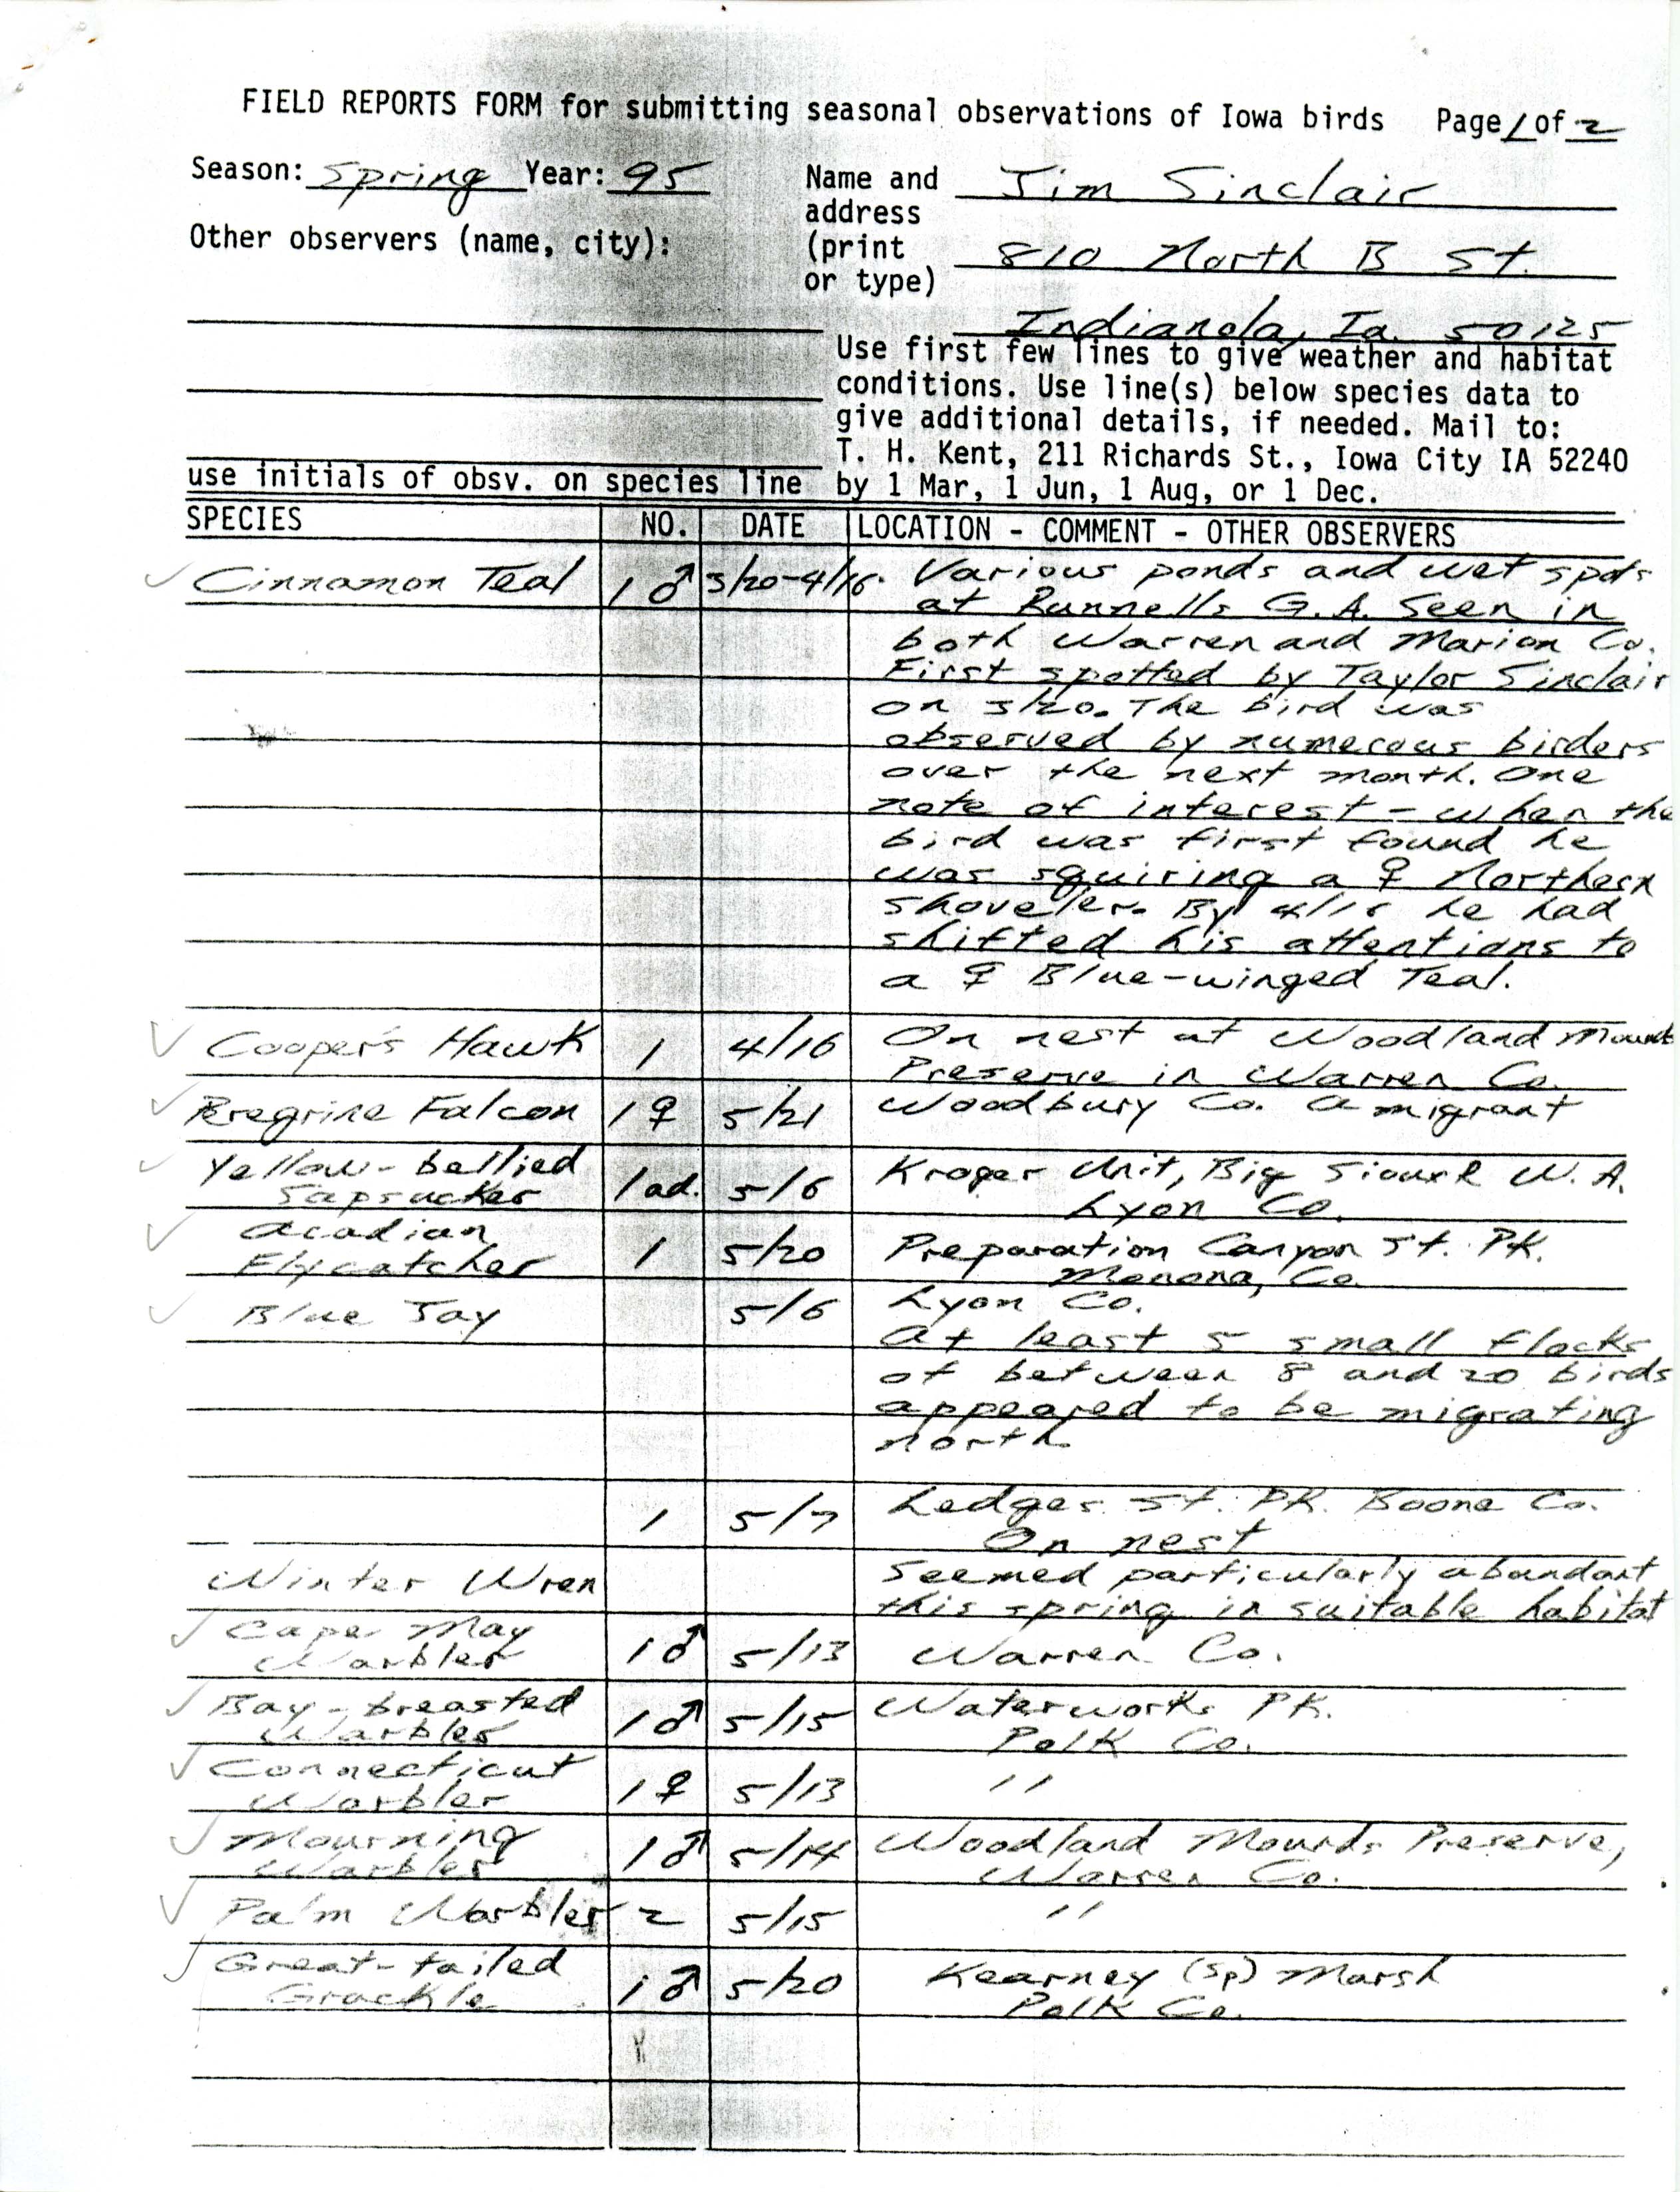 Field reports form for submitting seasonal observations of Iowa birds, spring 1995, Jim Sinclair